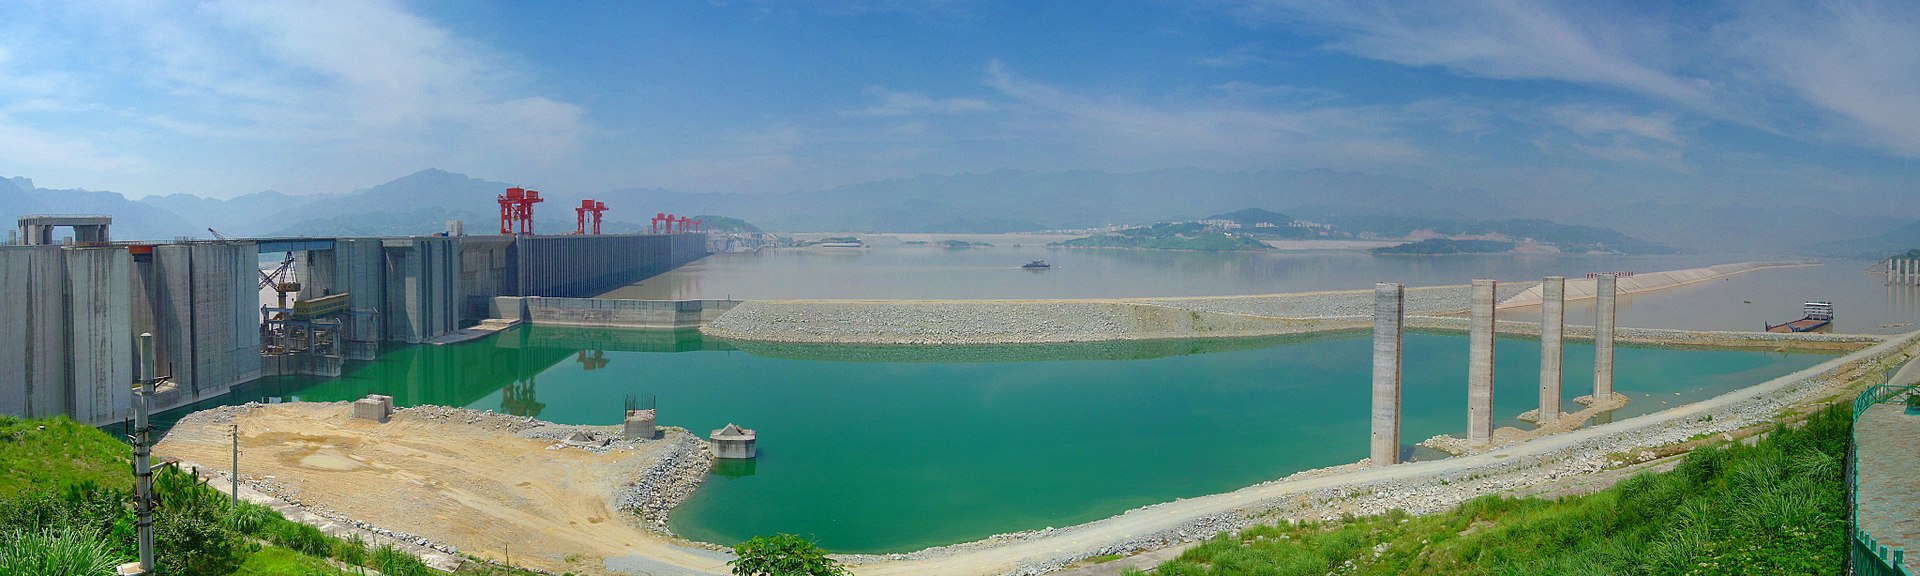 Three Gorges hydropower plant and dam